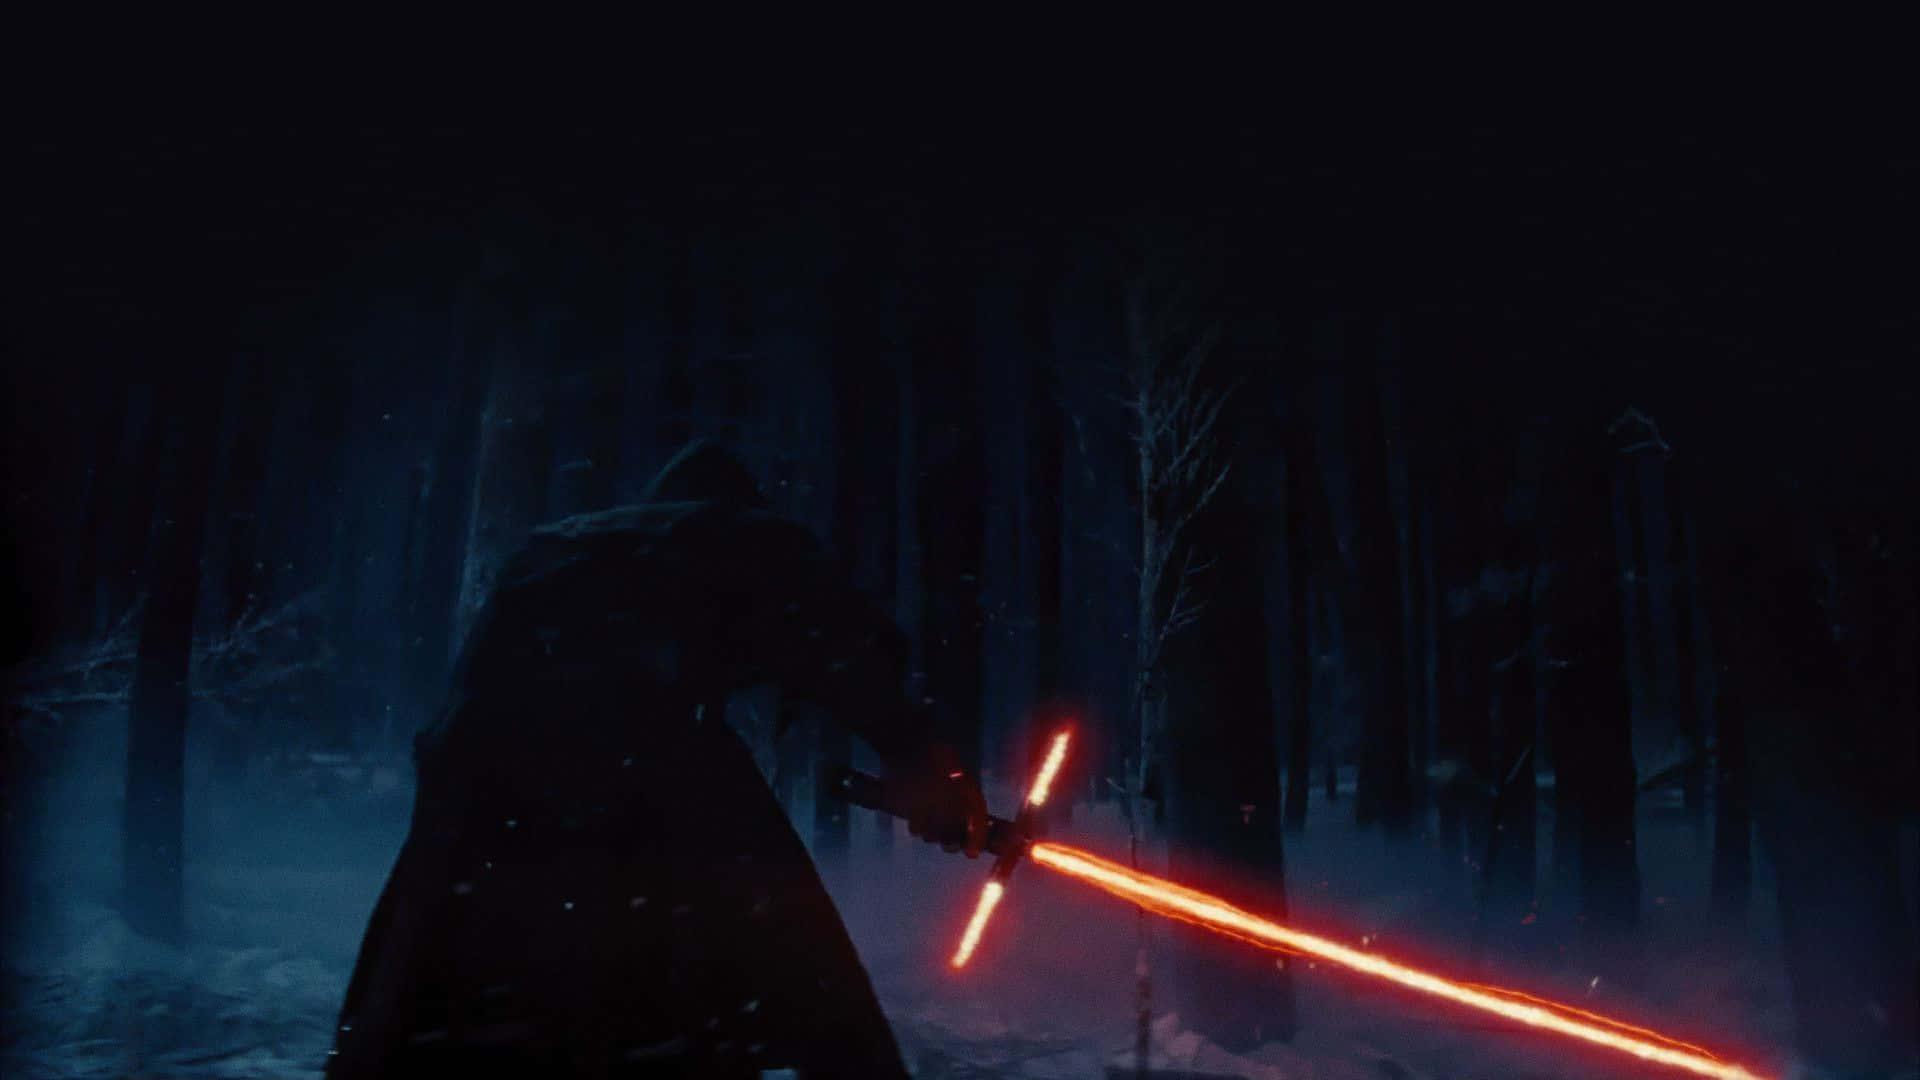 Stunning Star Wars Scene with Iconic Characters